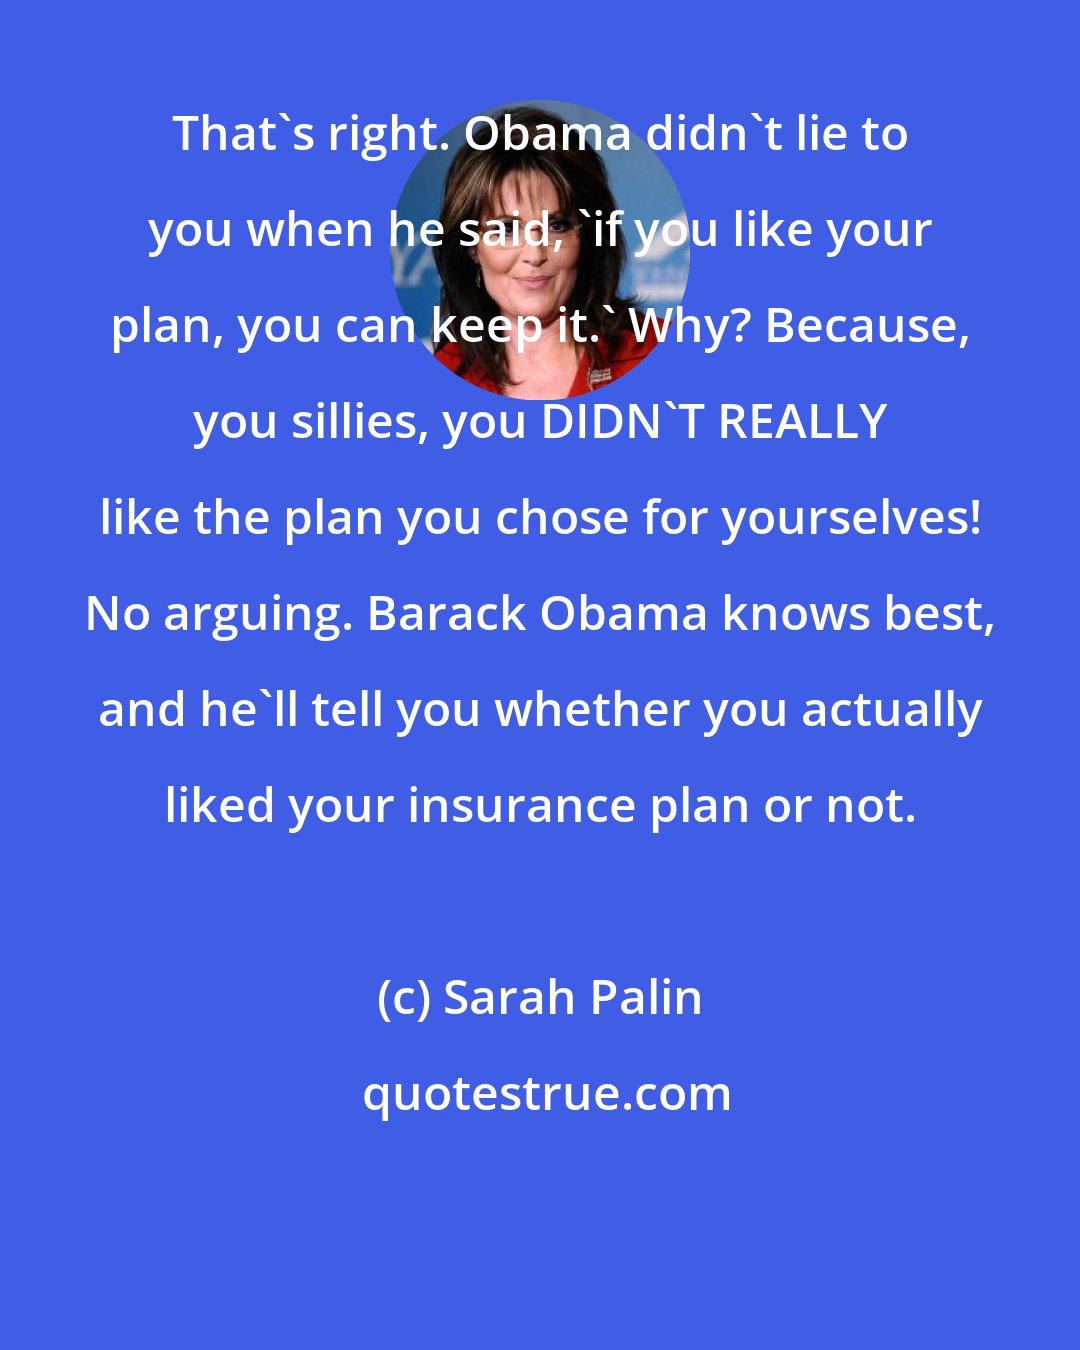 Sarah Palin: That's right. Obama didn't lie to you when he said, 'if you like your plan, you can keep it.' Why? Because, you sillies, you DIDN'T REALLY like the plan you chose for yourselves! No arguing. Barack Obama knows best, and he'll tell you whether you actually liked your insurance plan or not.